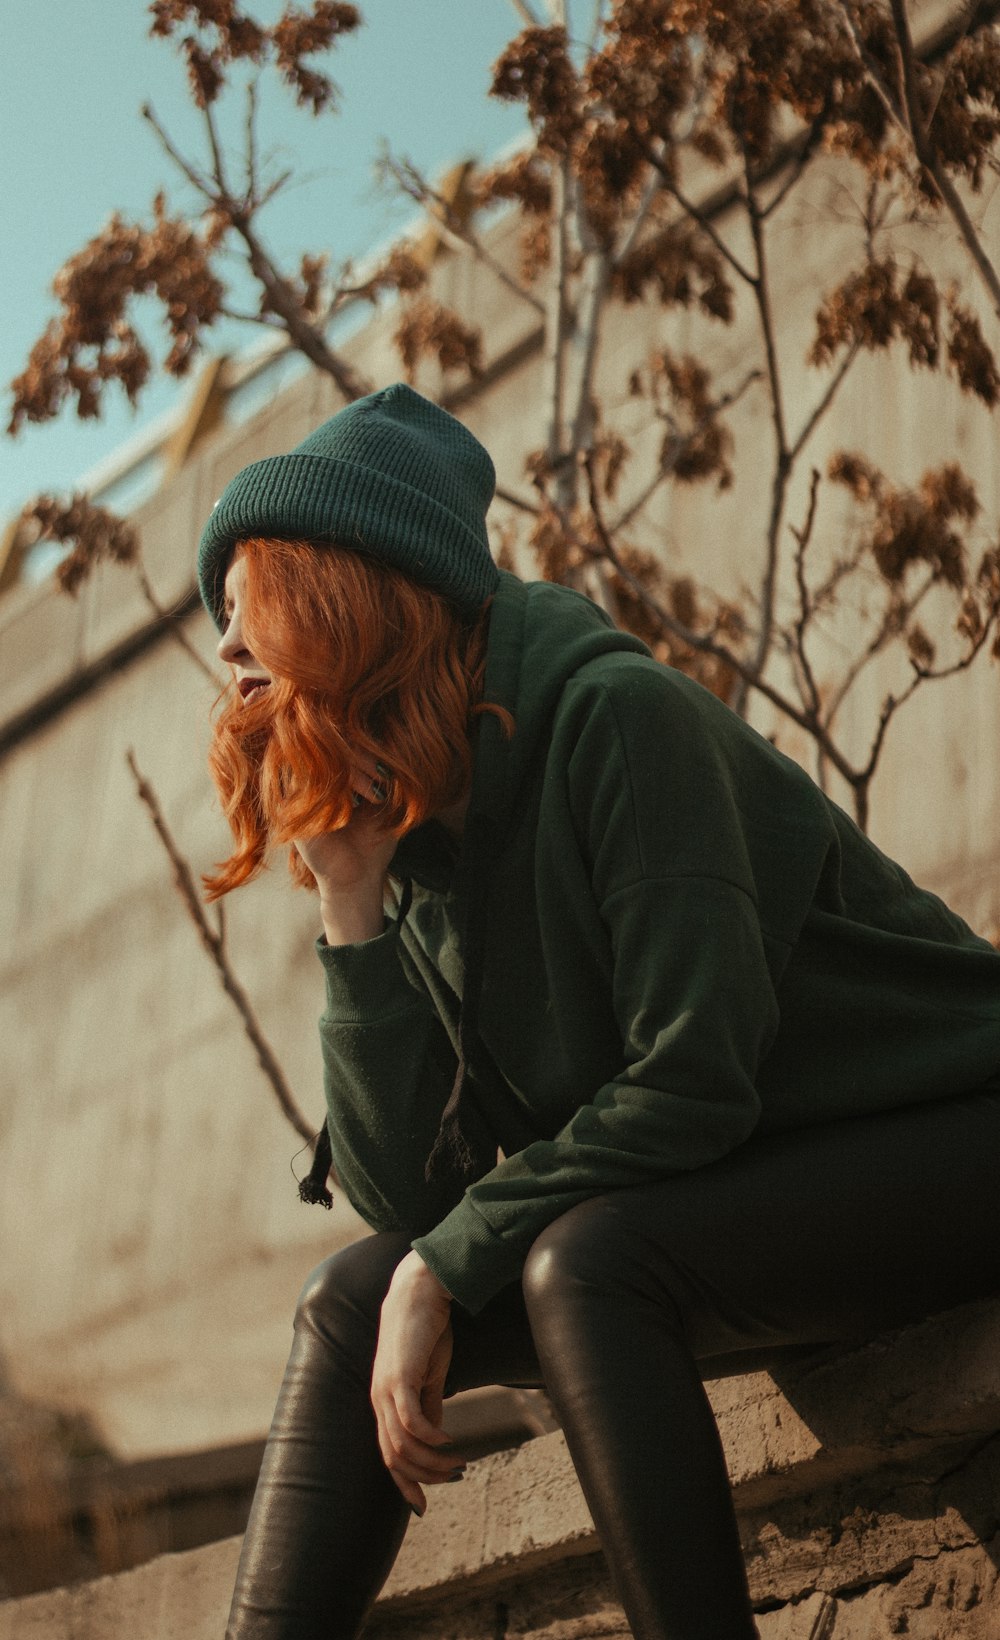 woman in green sweater and green knit cap sitting on brown wooden floor